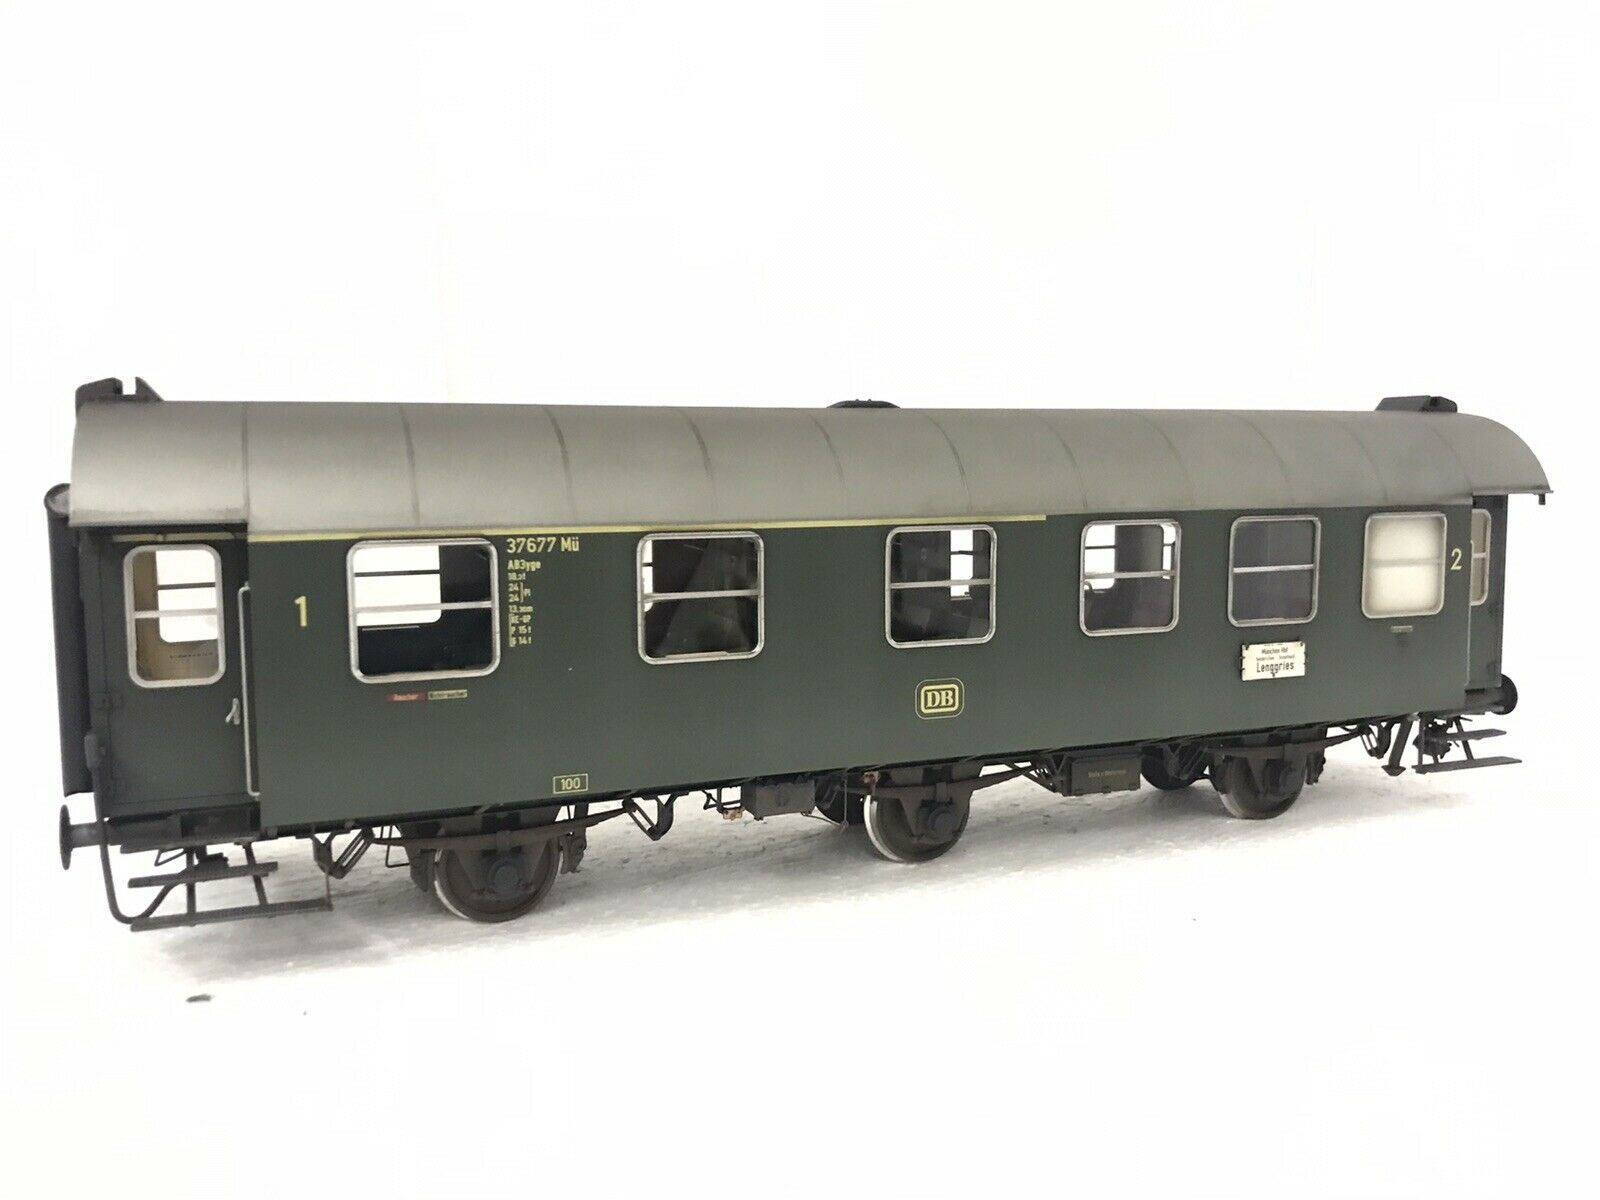 4 Wunder Gauge 1 Conversion Wagon 3yg Wagon Brass Dog Aged Boxed For Km1 Kiss